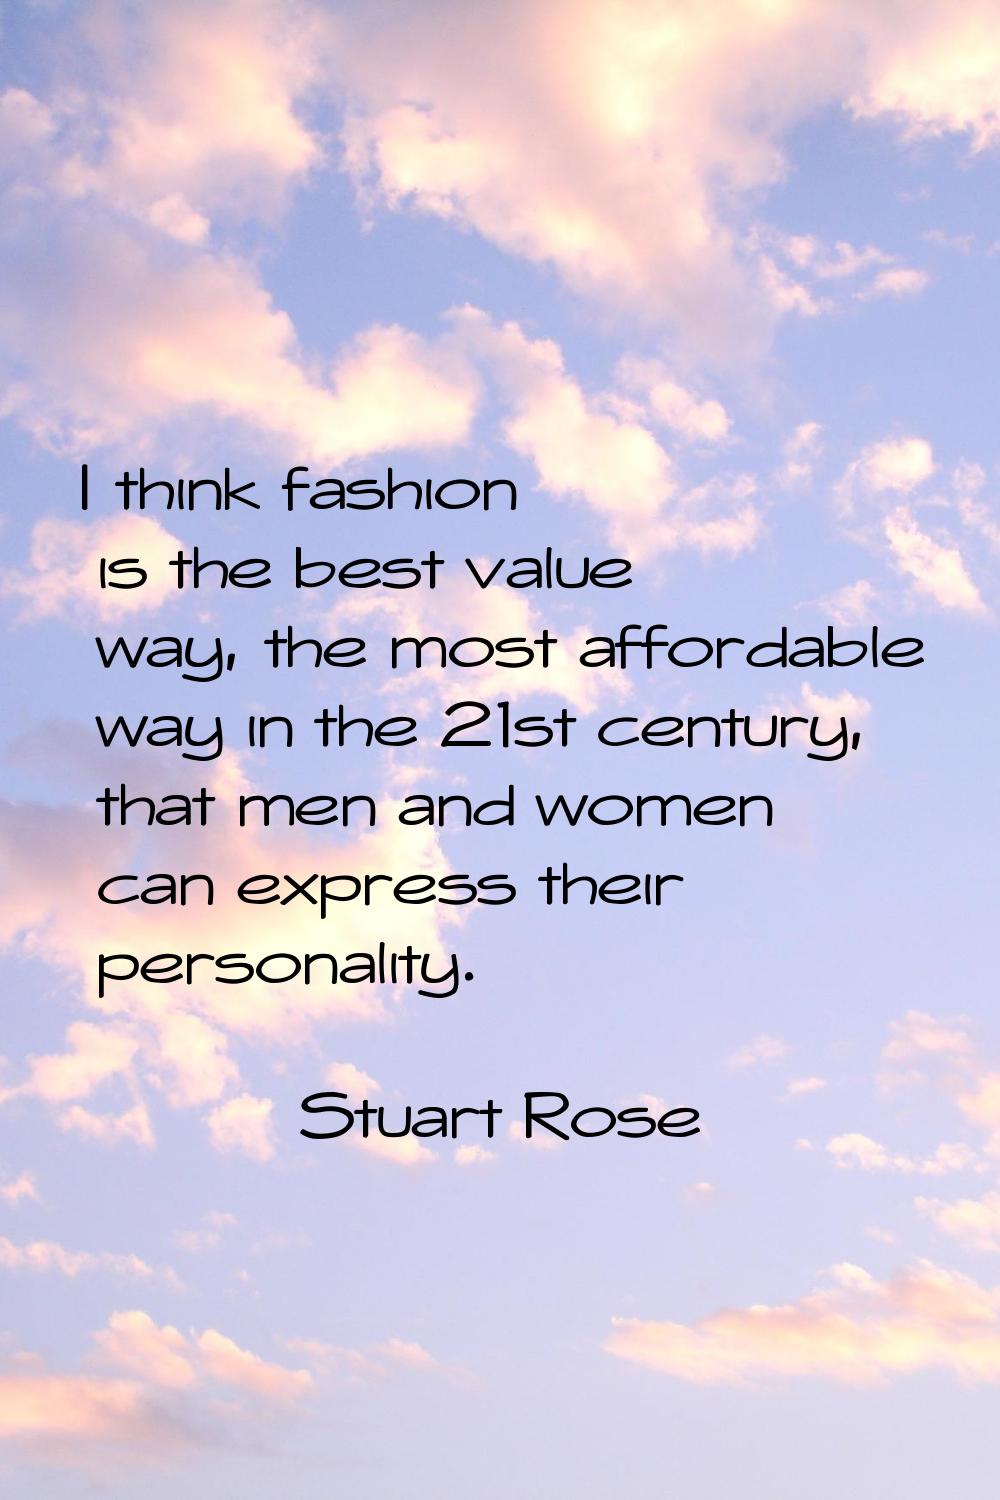 I think fashion is the best value way, the most affordable way in the 21st century, that men and wo